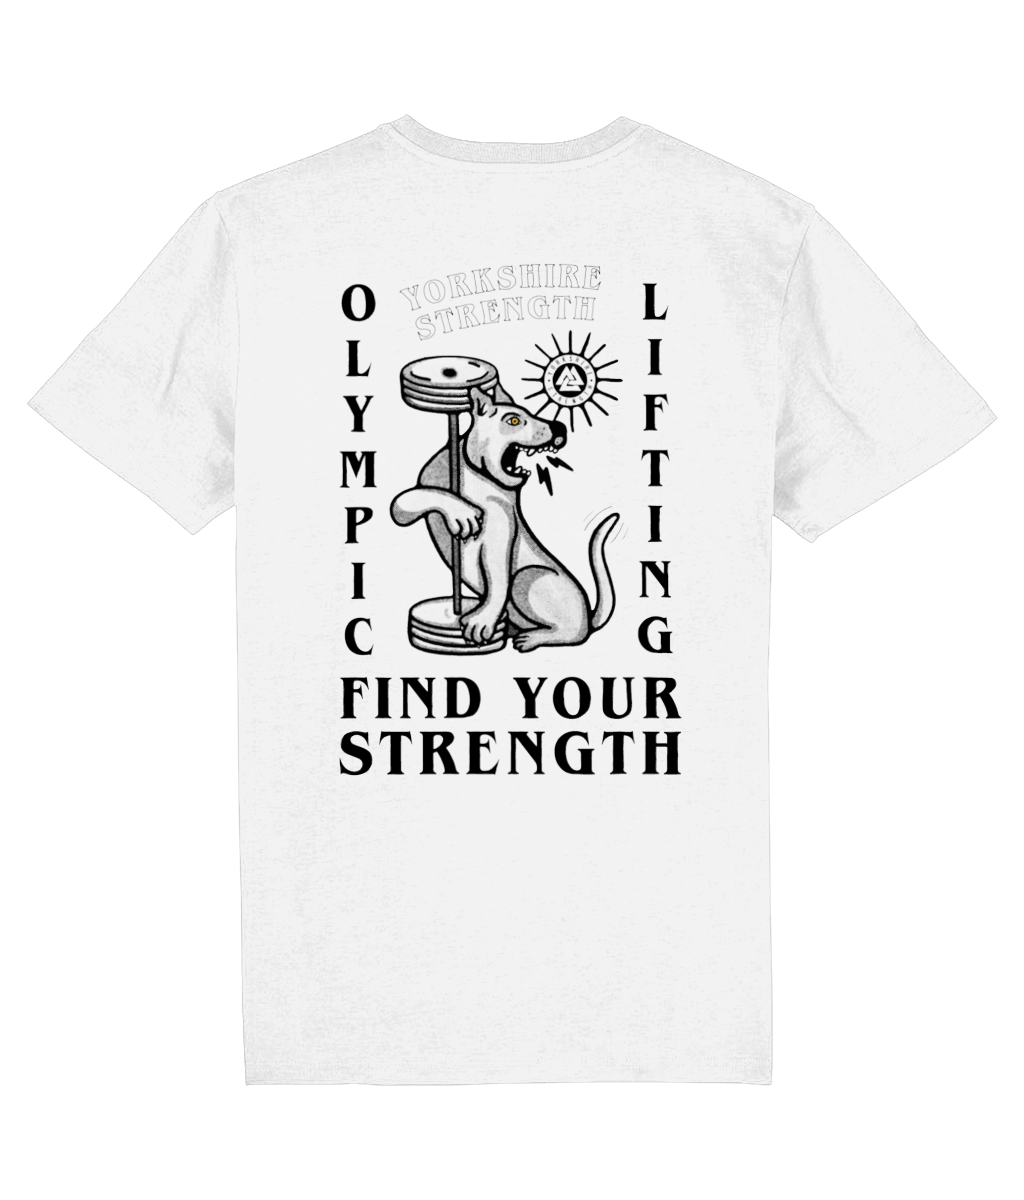 Find Your Strength t-shirt - Yorkshire Strength